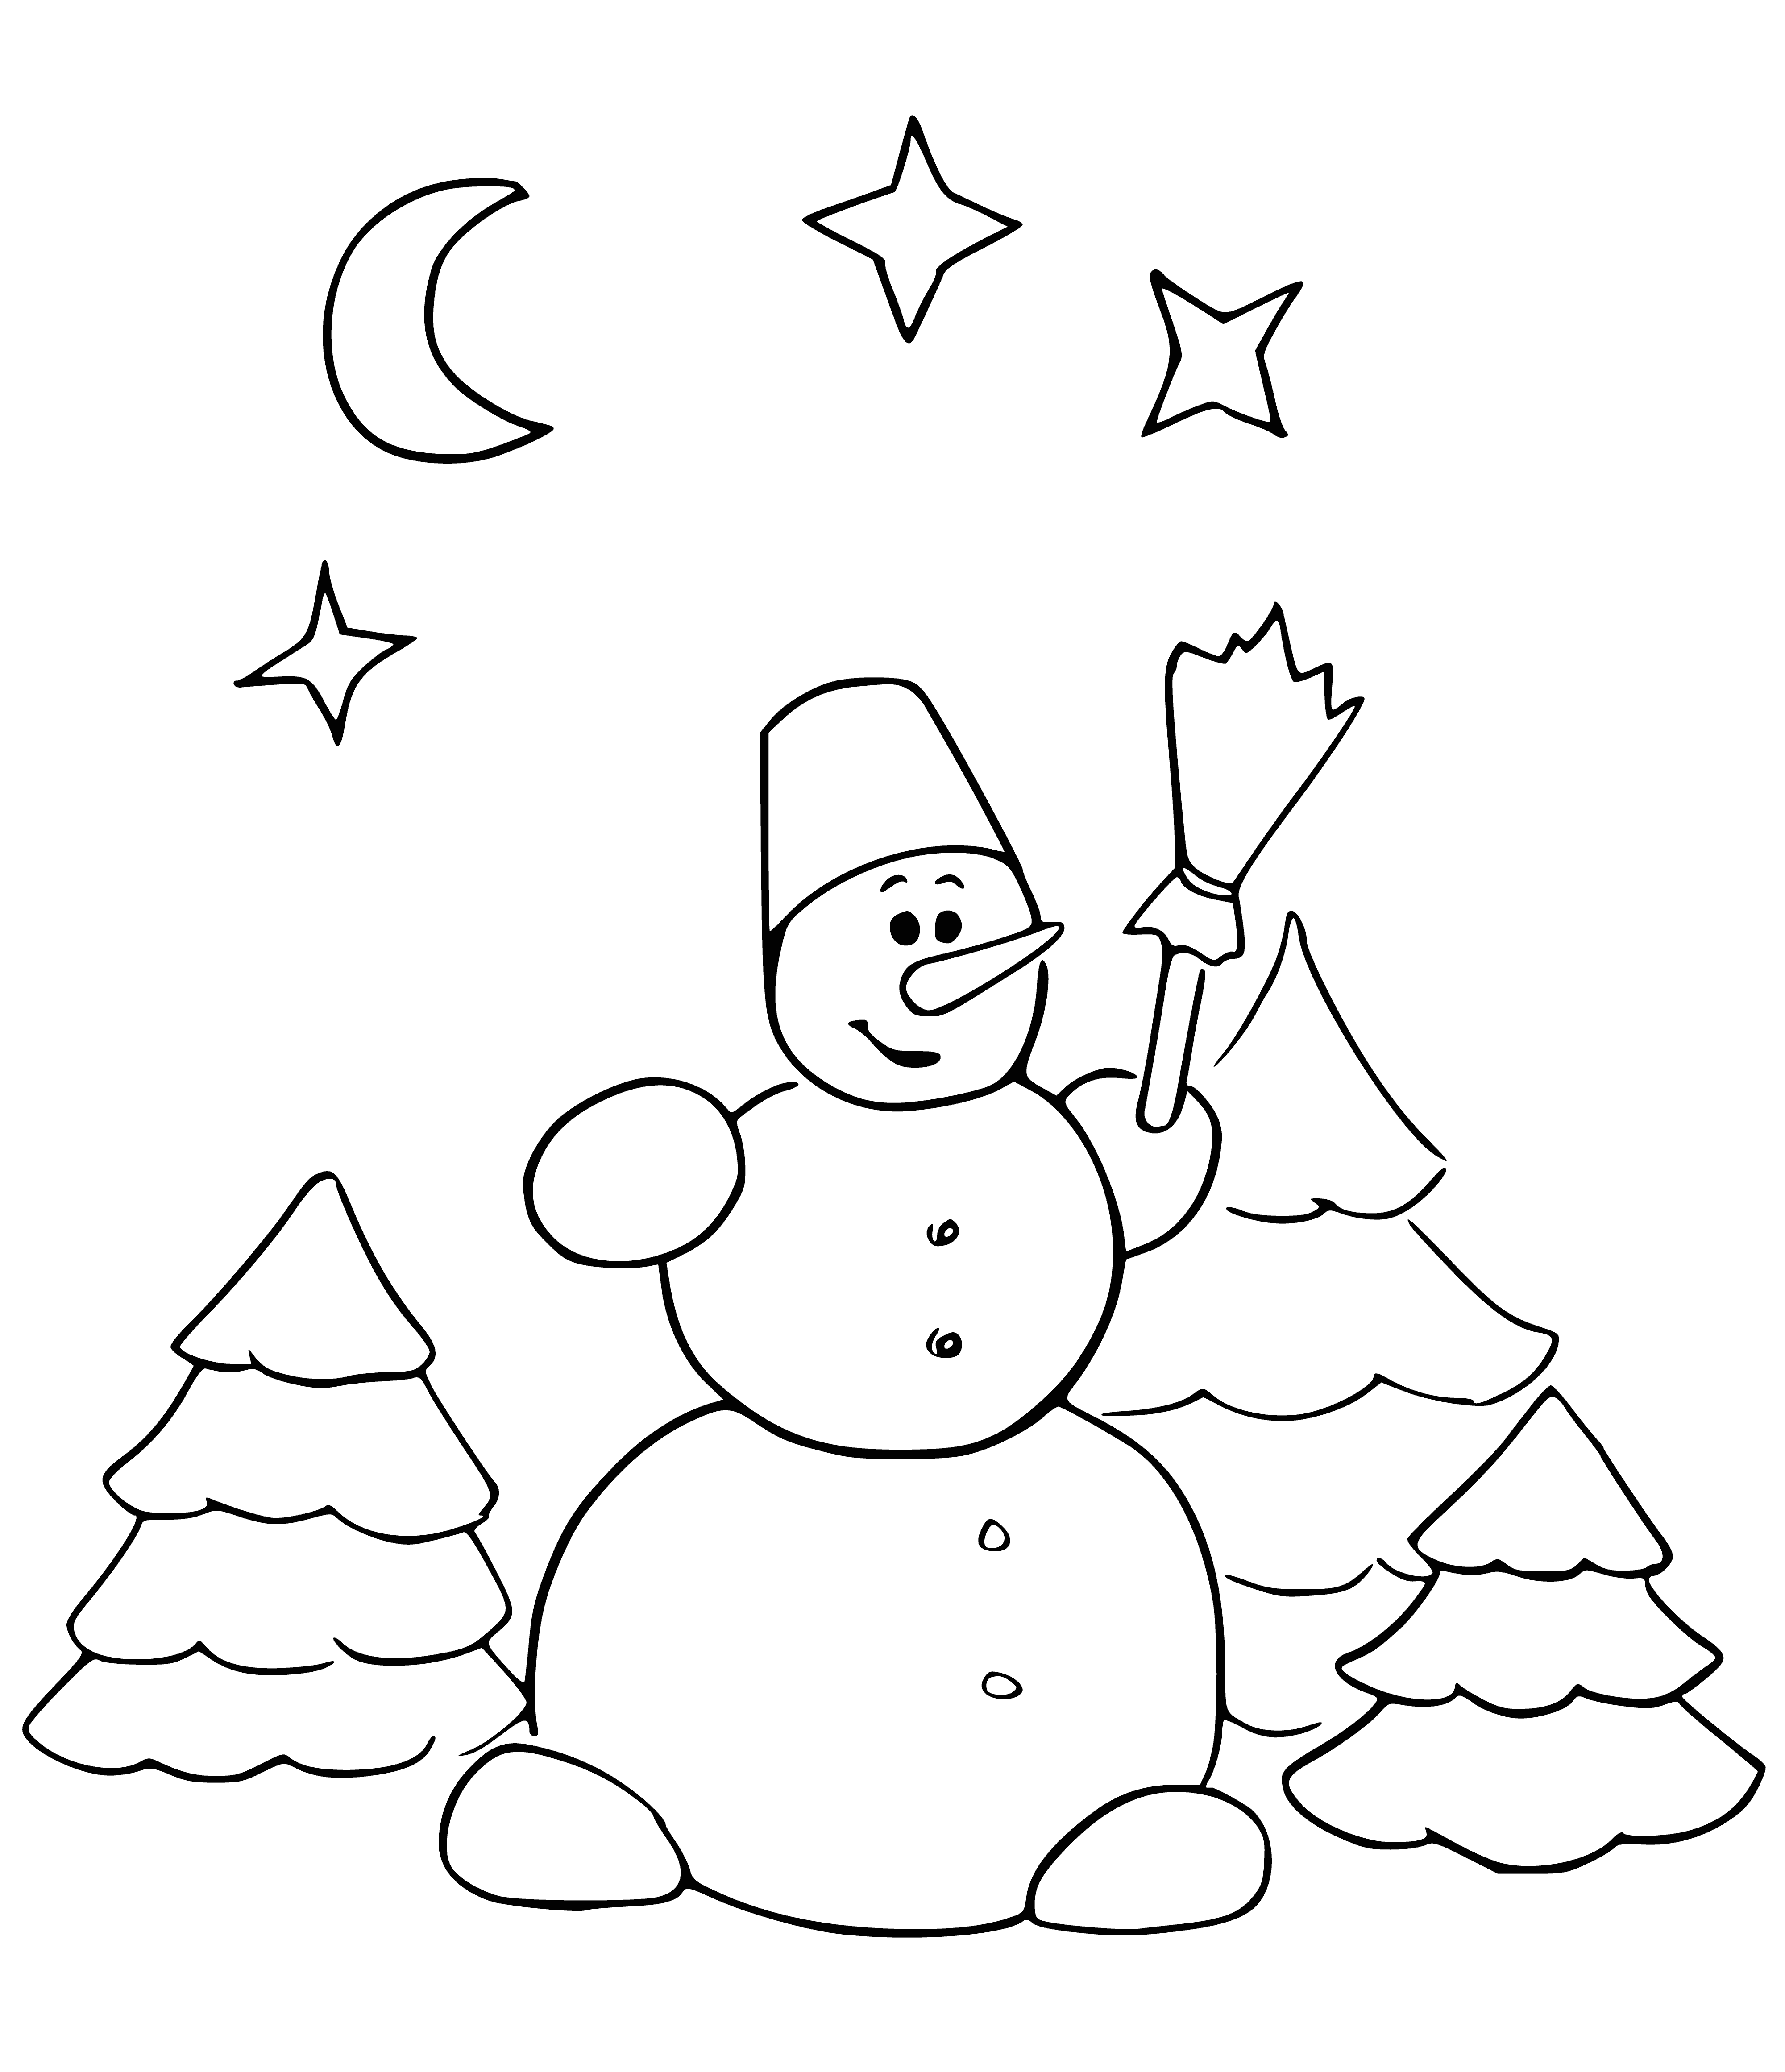 coloring page: Snowman in a snowy forest wears a red scarf & has a carrot nose. Trees around it also have snow on them & ground is cold & white.